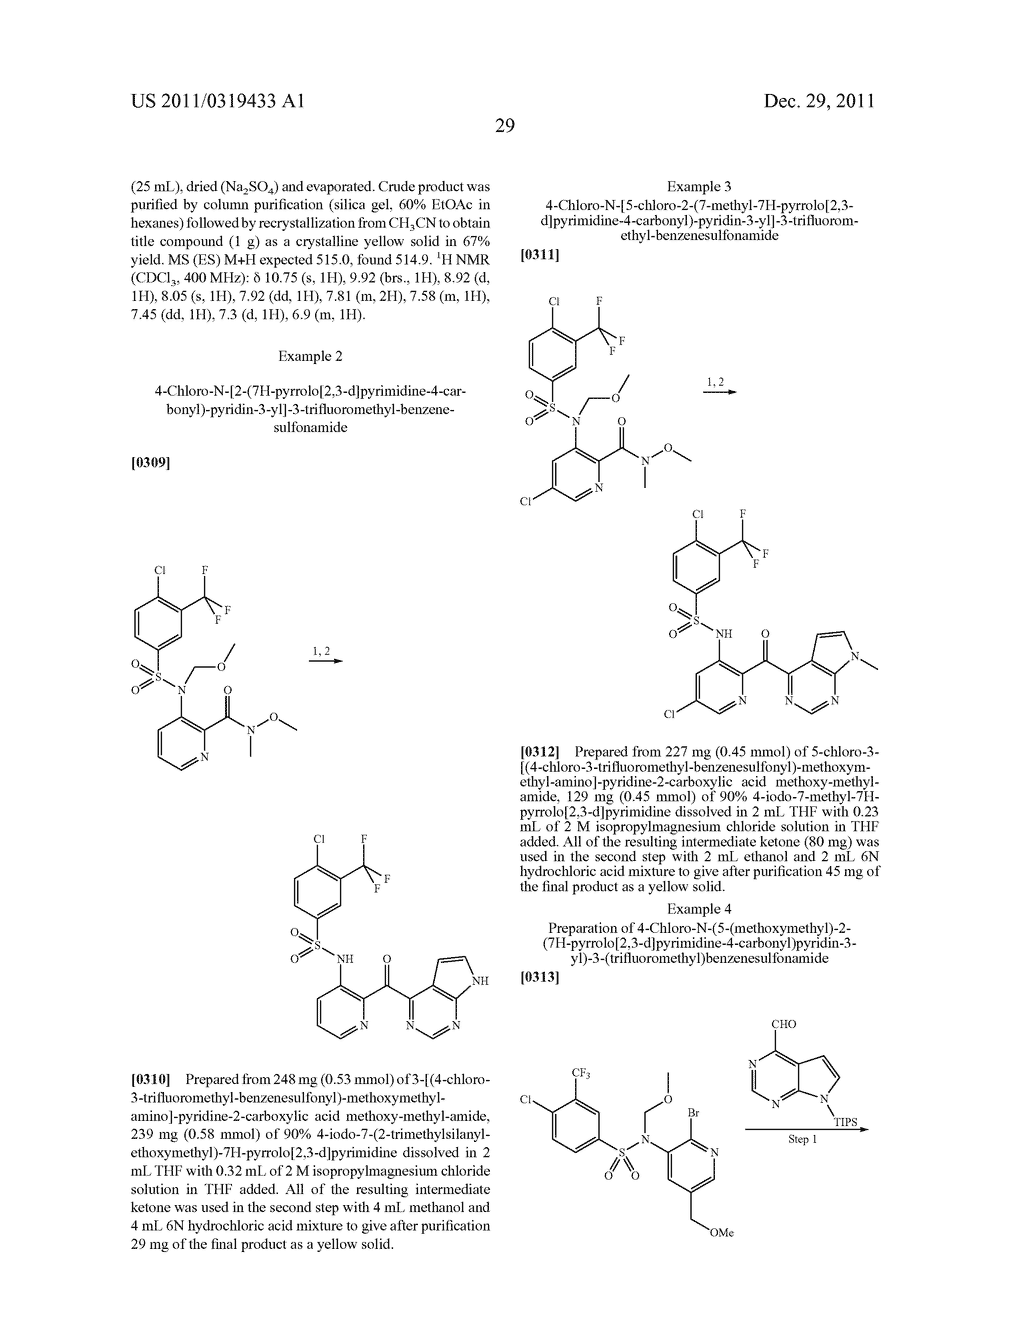 FUSED HETEROARYL PYRIDYL AND PHENYL BENZENESUFLONAMIDES AS CCR2 MODULATORS     FOR THE TREATMENT OF INFLAMMATION - diagram, schematic, and image 31